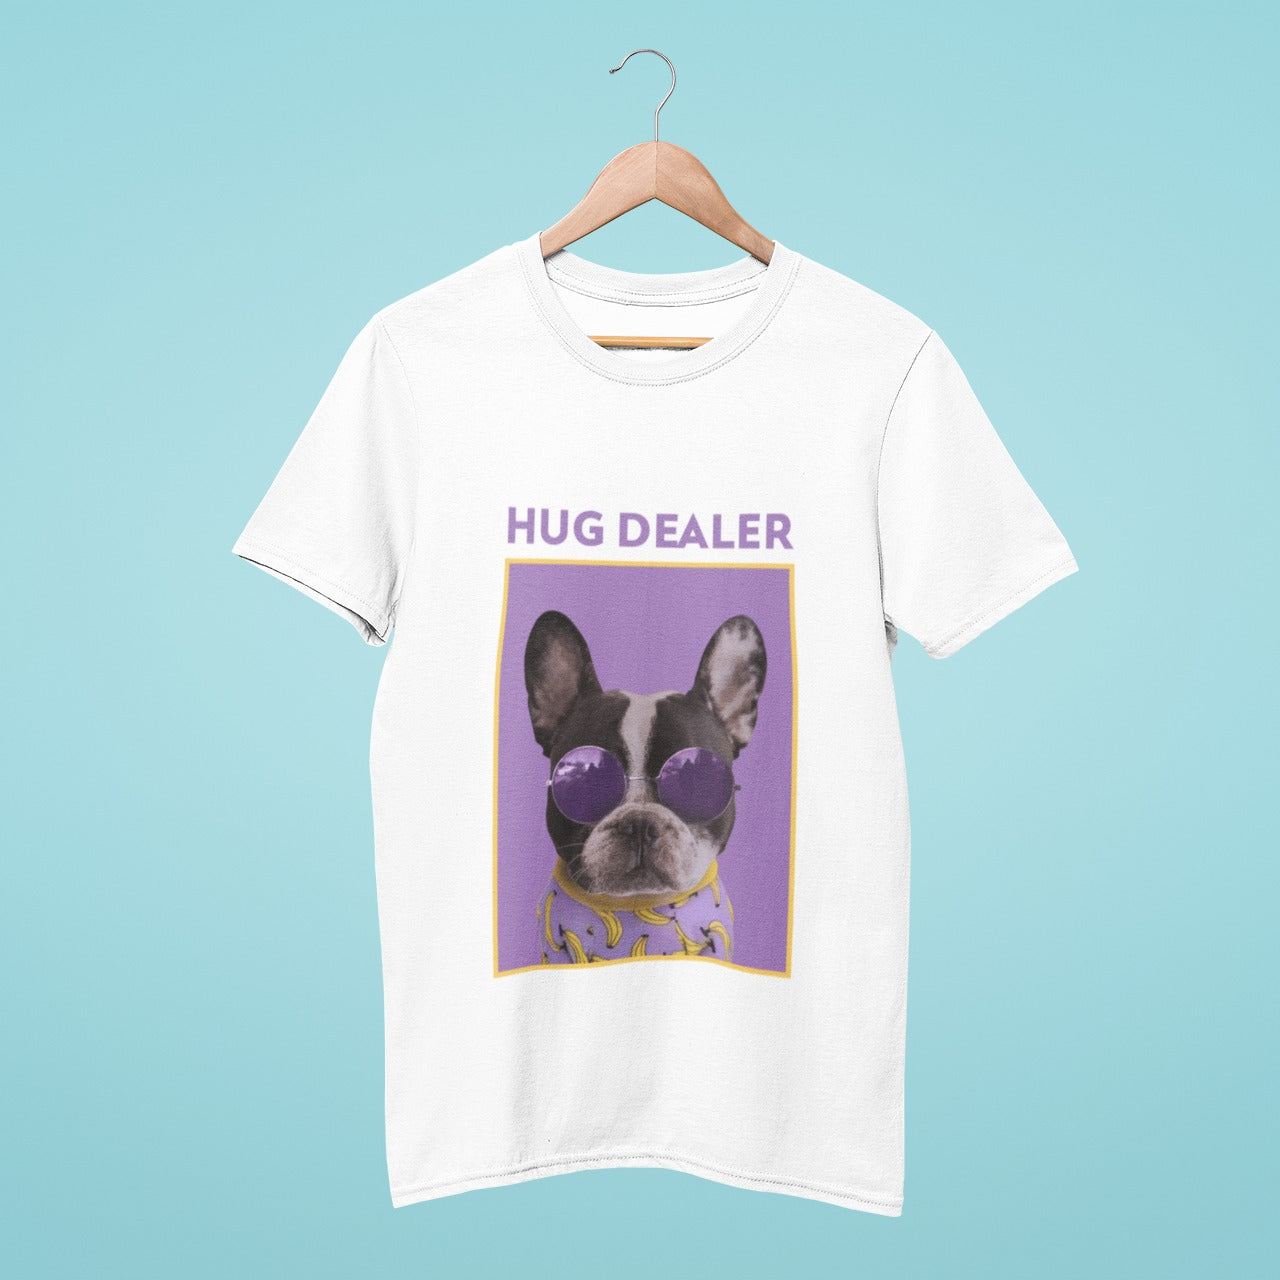 This white t-shirt features a French bulldog sporting trendy purple round sunglasses, with the title "hug dealer" written in bold letters. Spread positive vibes and embrace your inner hug dealer with this fun and playful tee. Perfect for dog lovers and those who love spreading love and kindness.